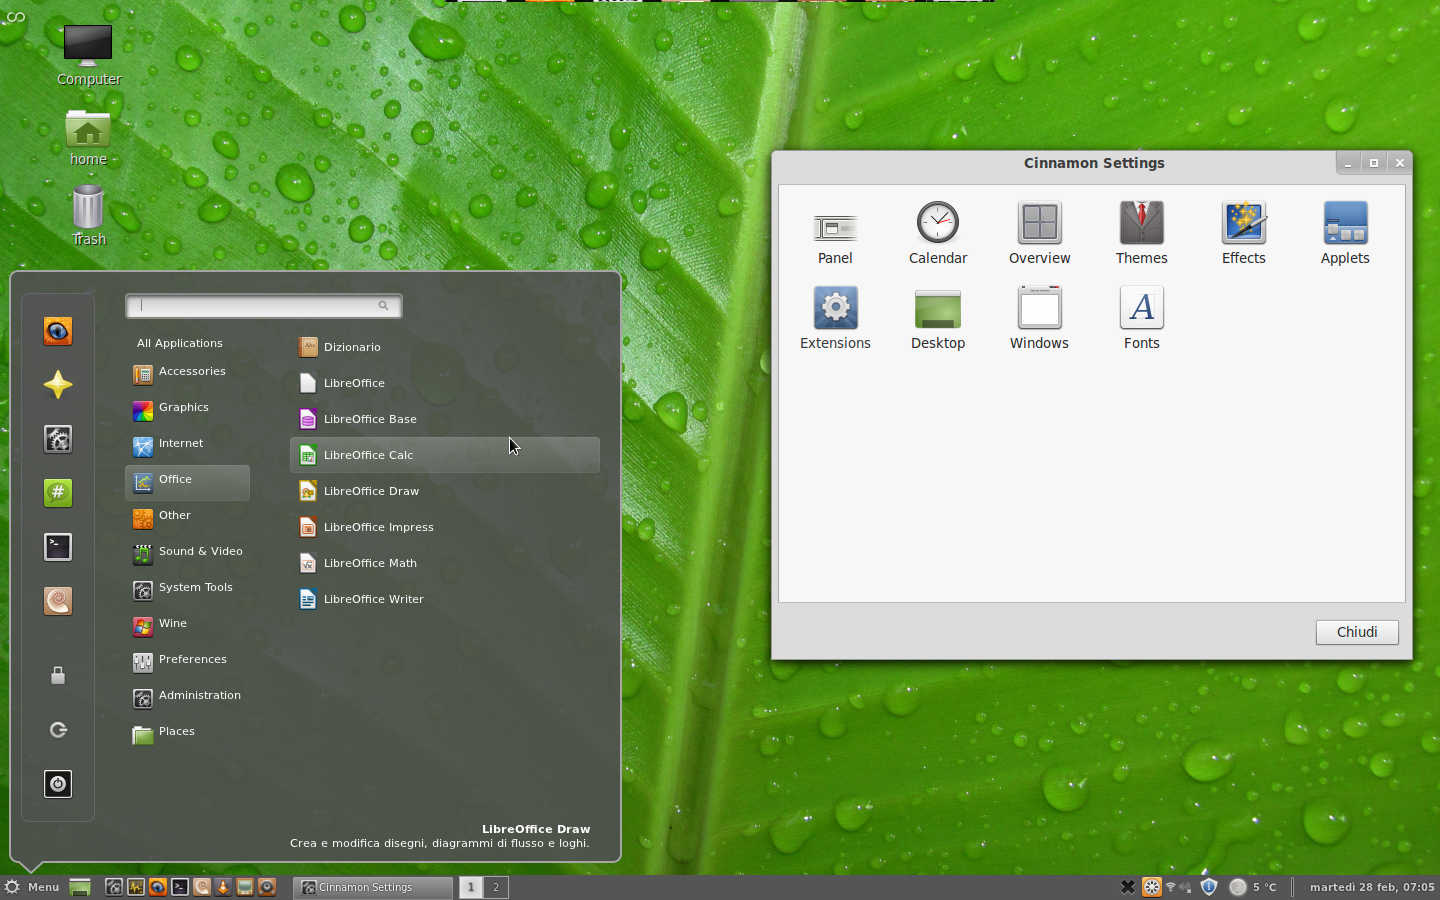 http://upload.wikimedia.org/wikipedia/commons/0/07/Linux_Mint_12_with_Cinnamon.png